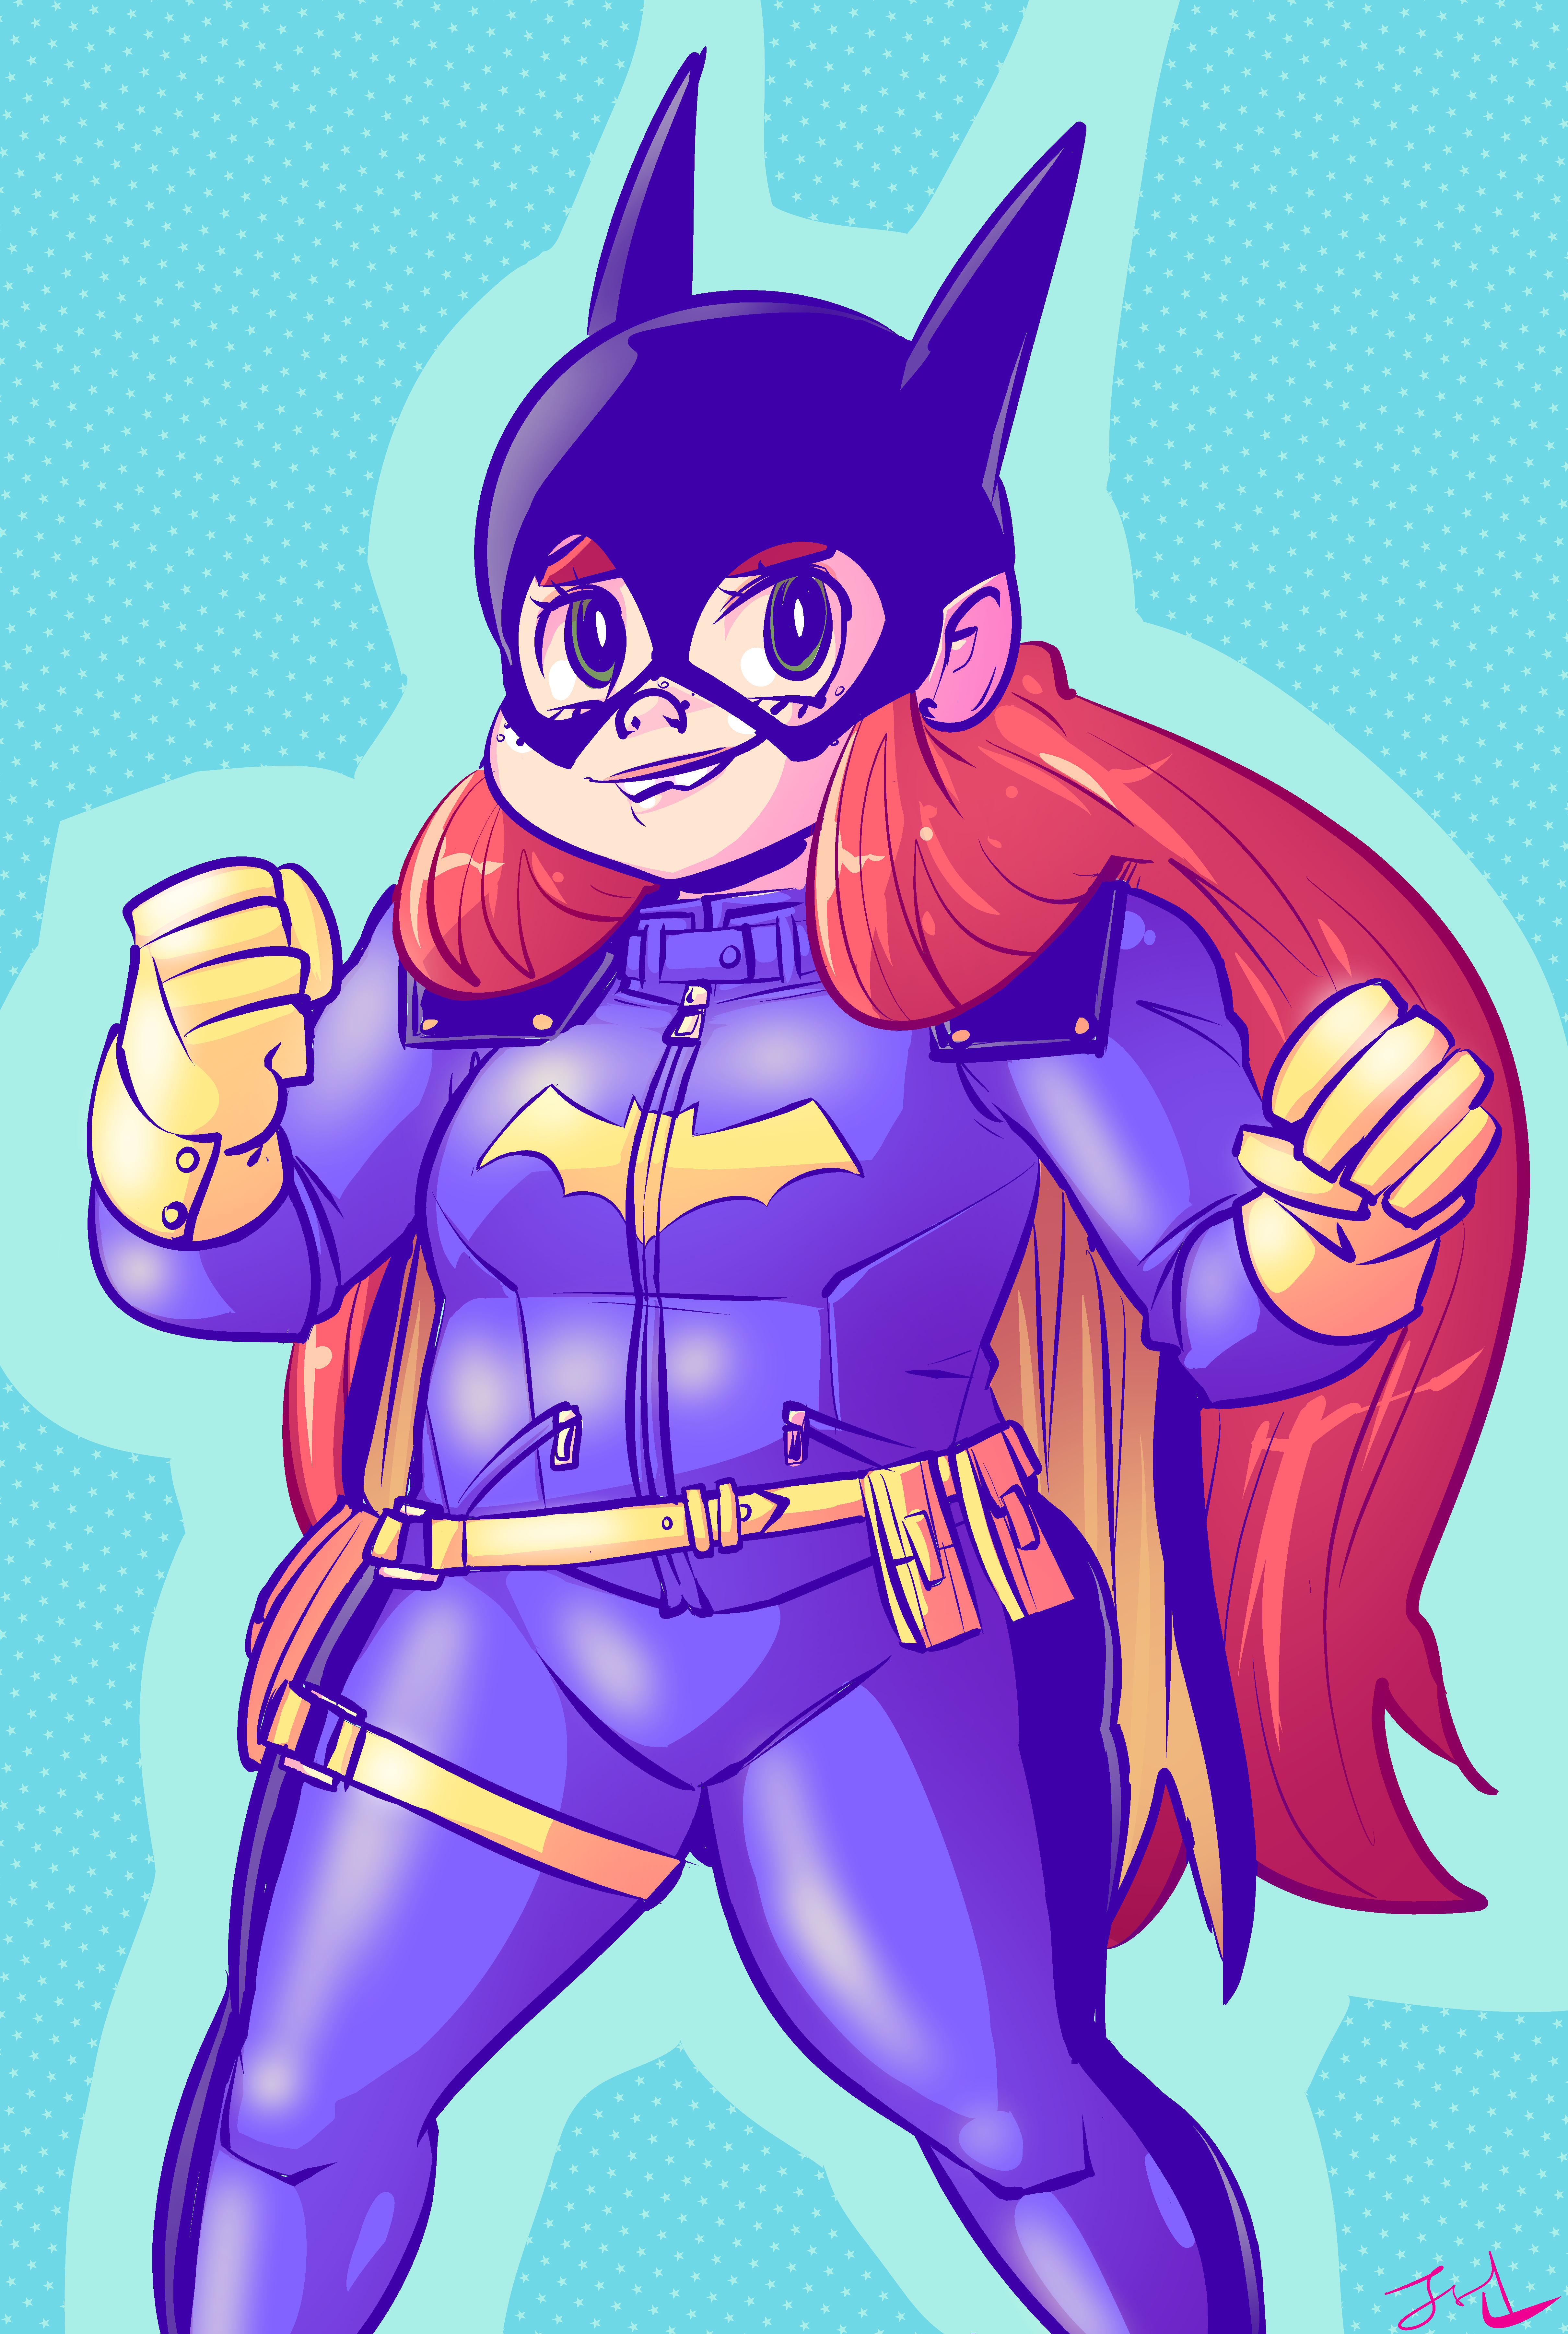 Batgirl cosplay (commission for Max)